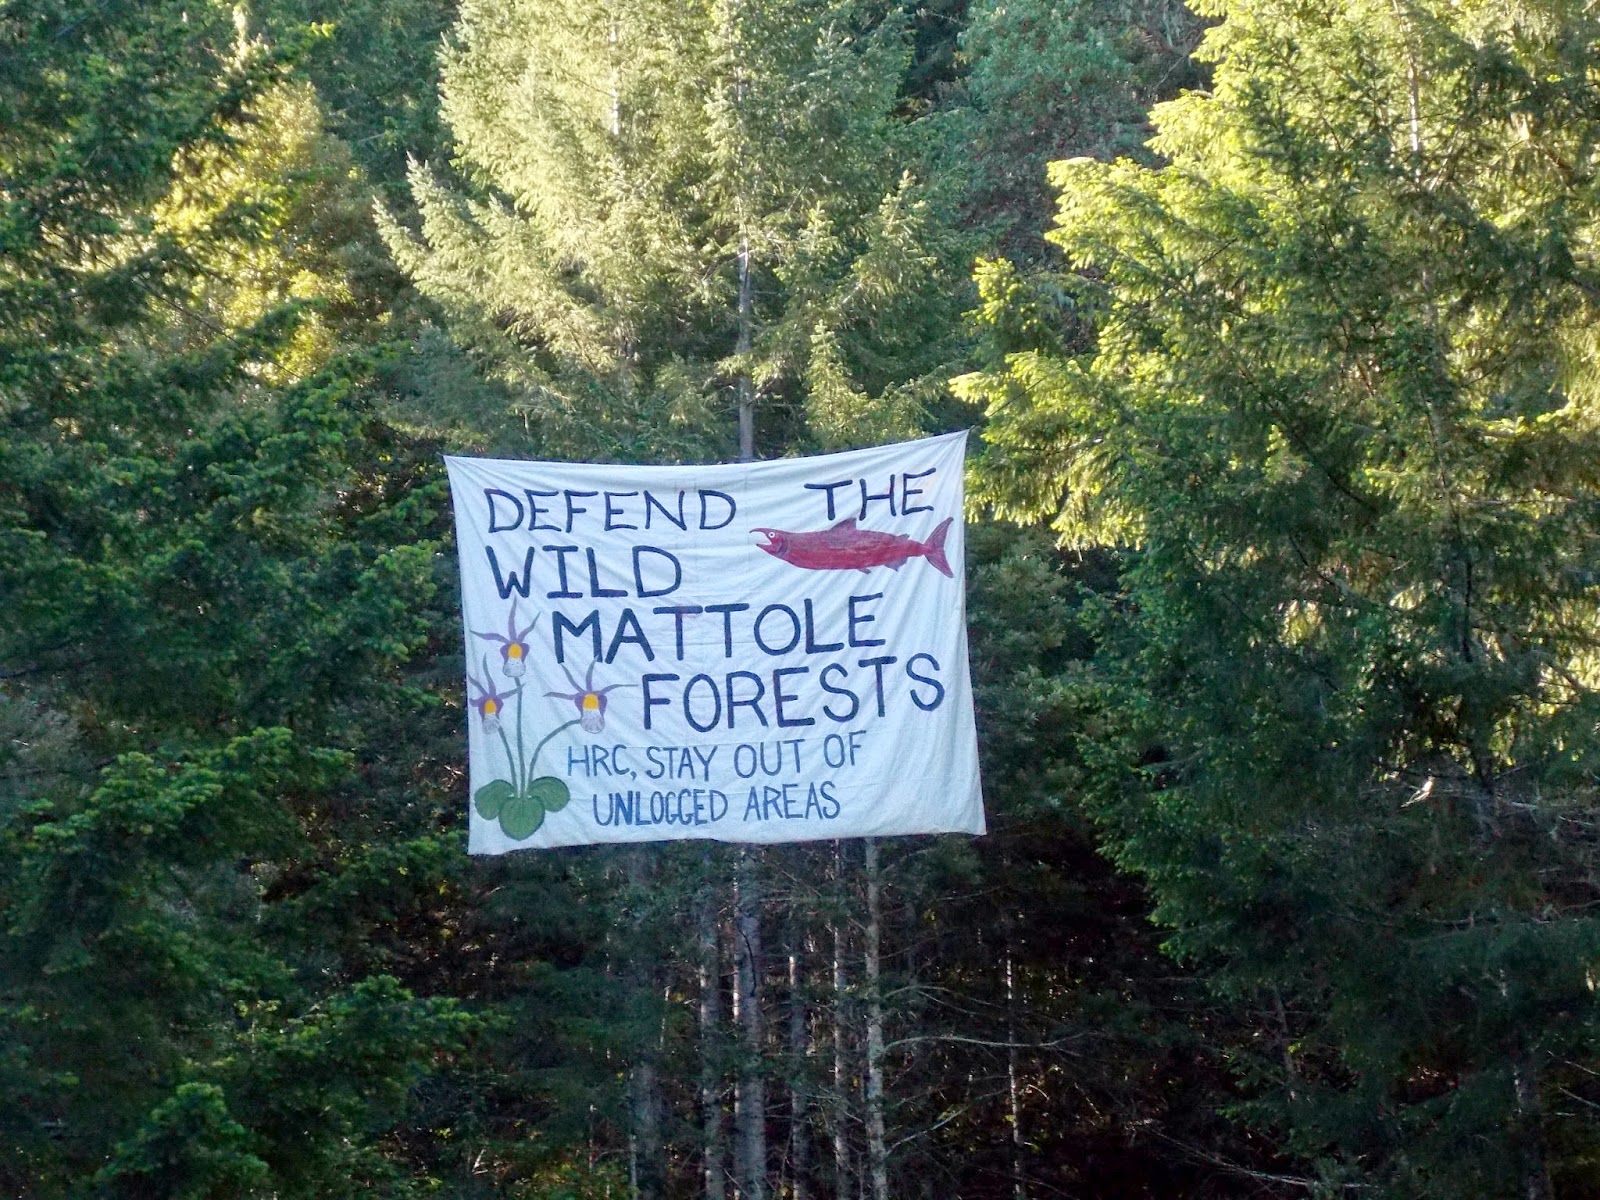 Defend the wild Mattole forests! HRC, stay out of unlogged areas!